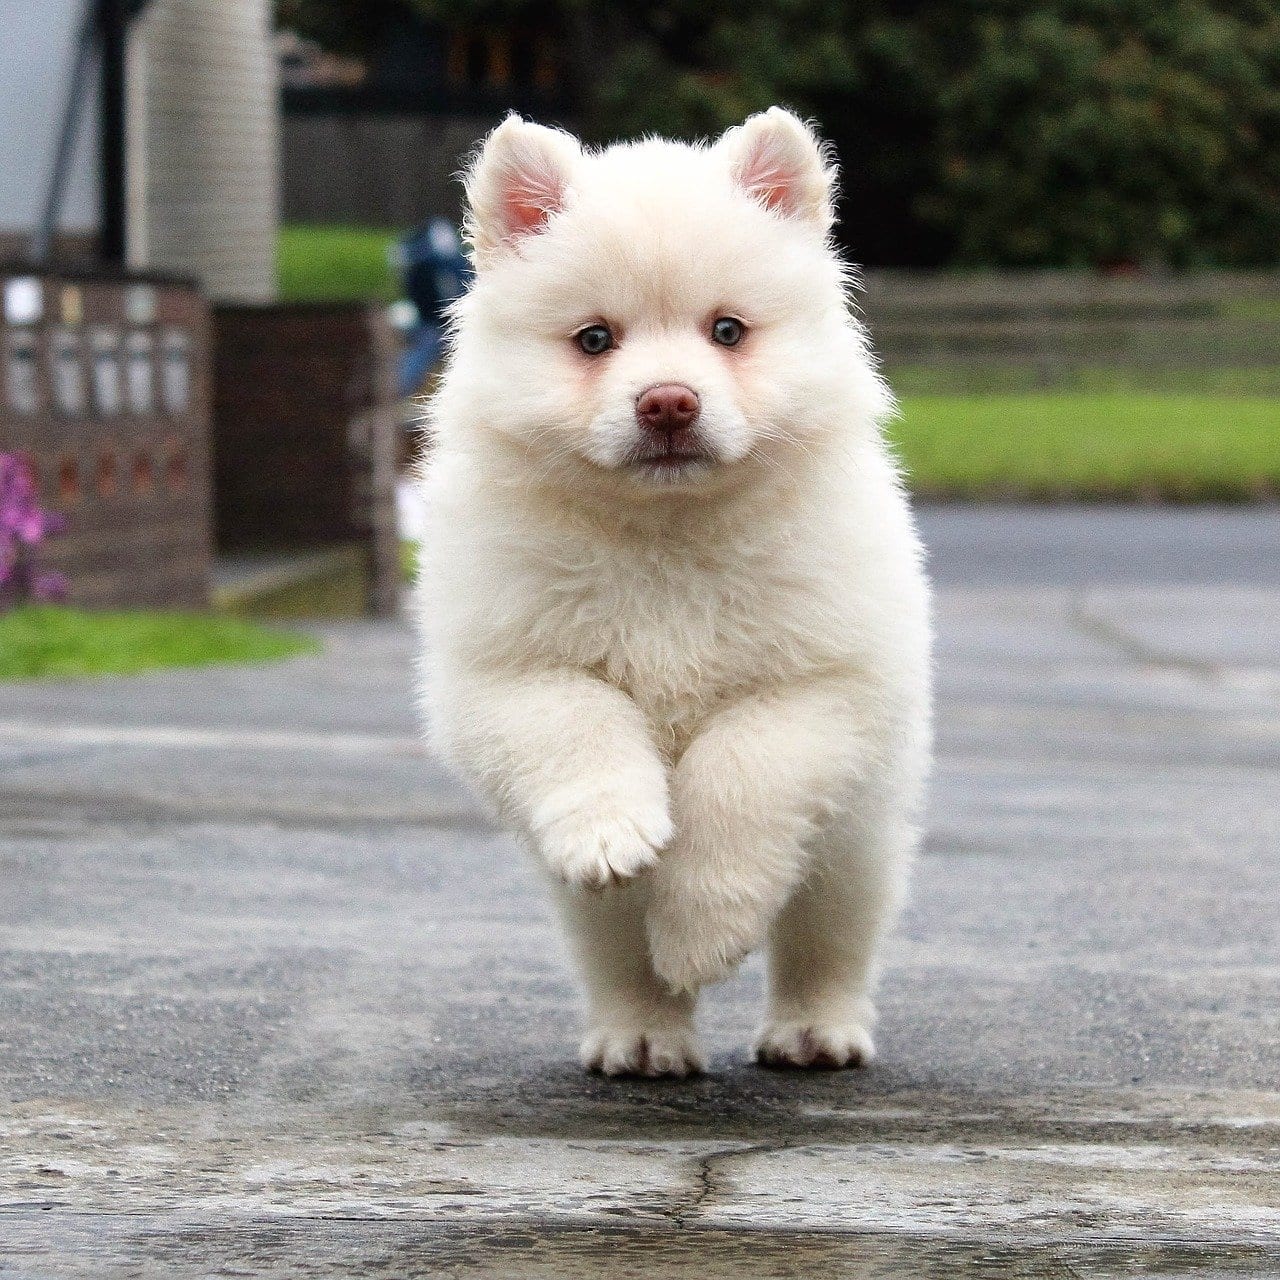 White puppy playing in a driveway